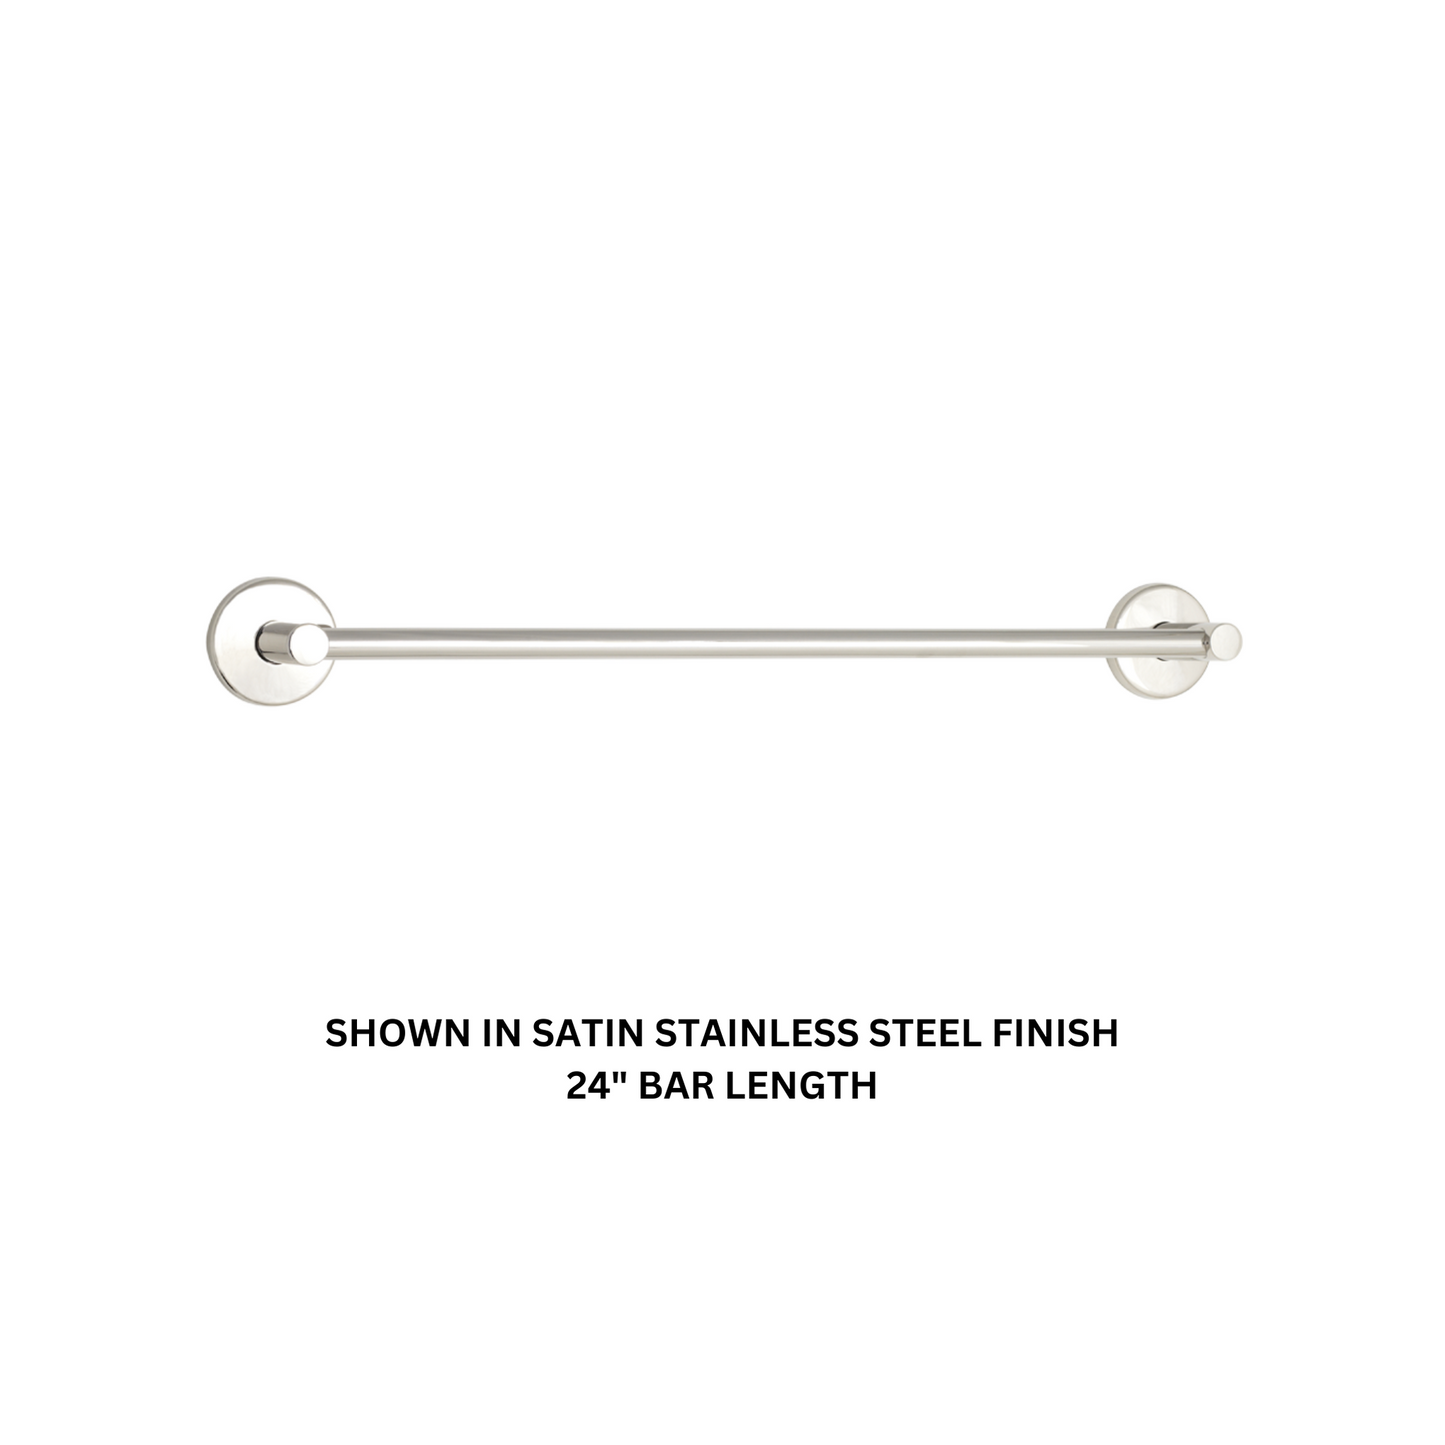 Seachrome Conorado Series 18" Polished Brass Powder Coat Concealed Mounting Flange Single Towel Bar